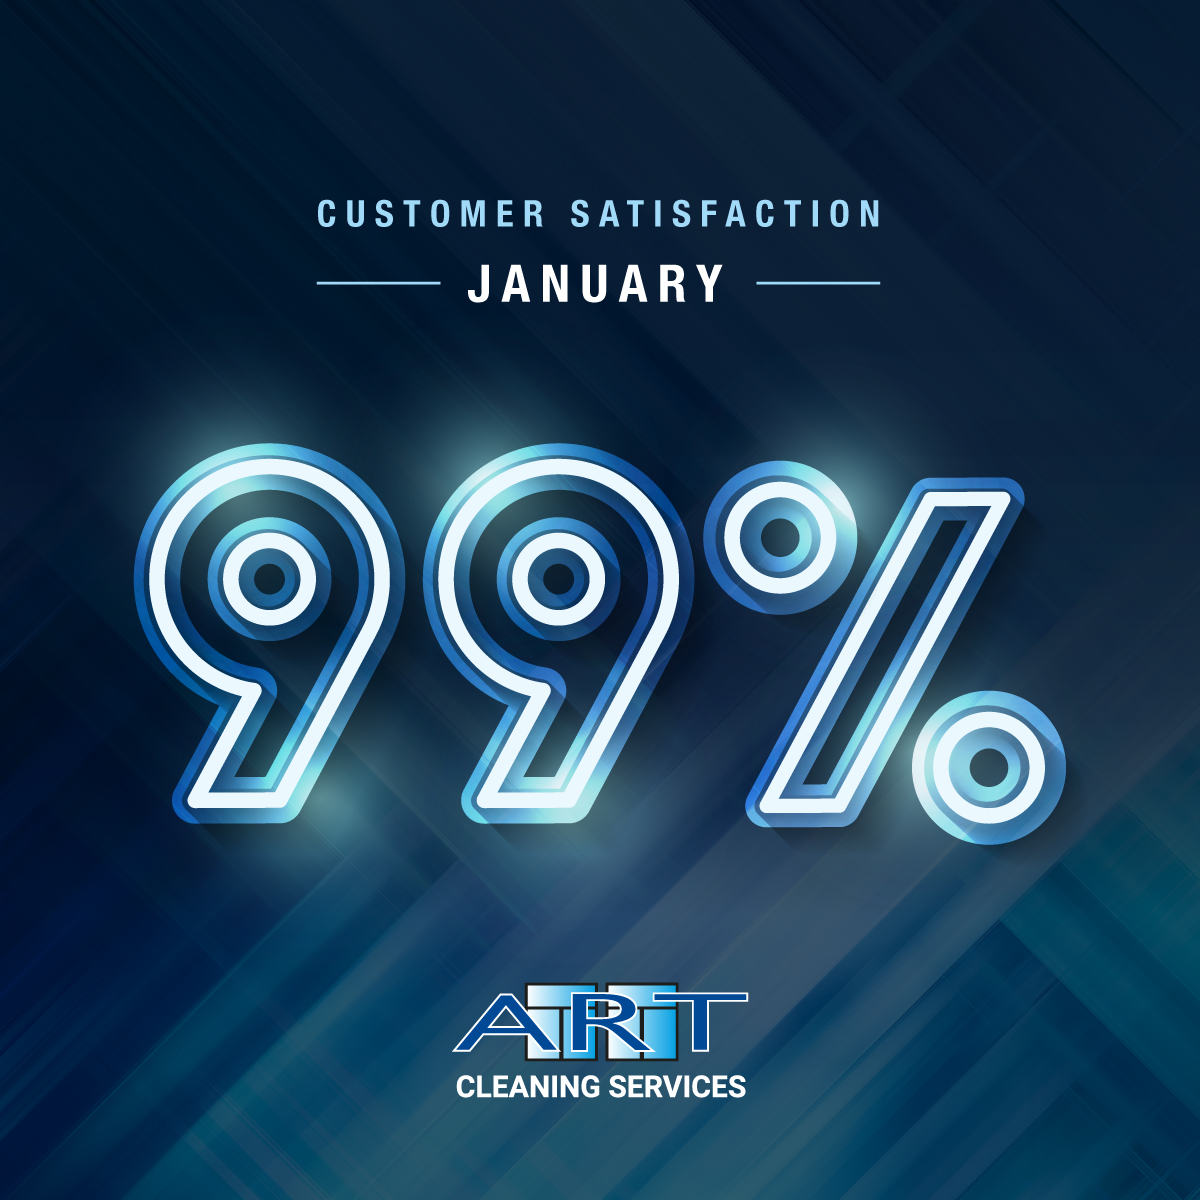 99% Client Satisfaction in January!